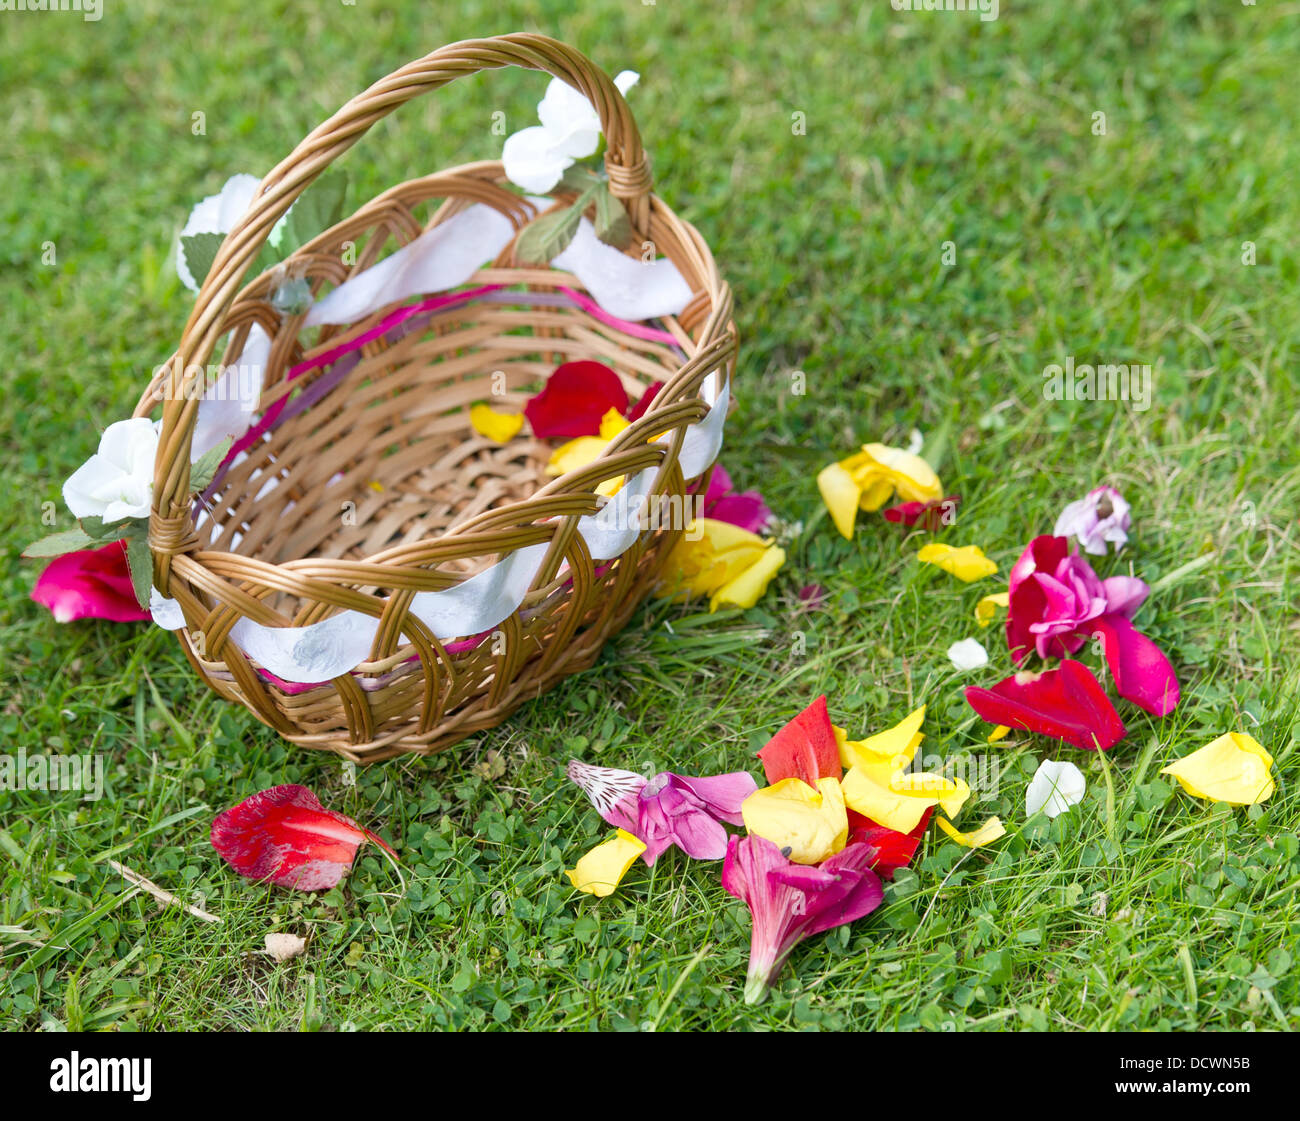 A Small Basket And Petals Sit On A Meadow After A Wedding Ceremony